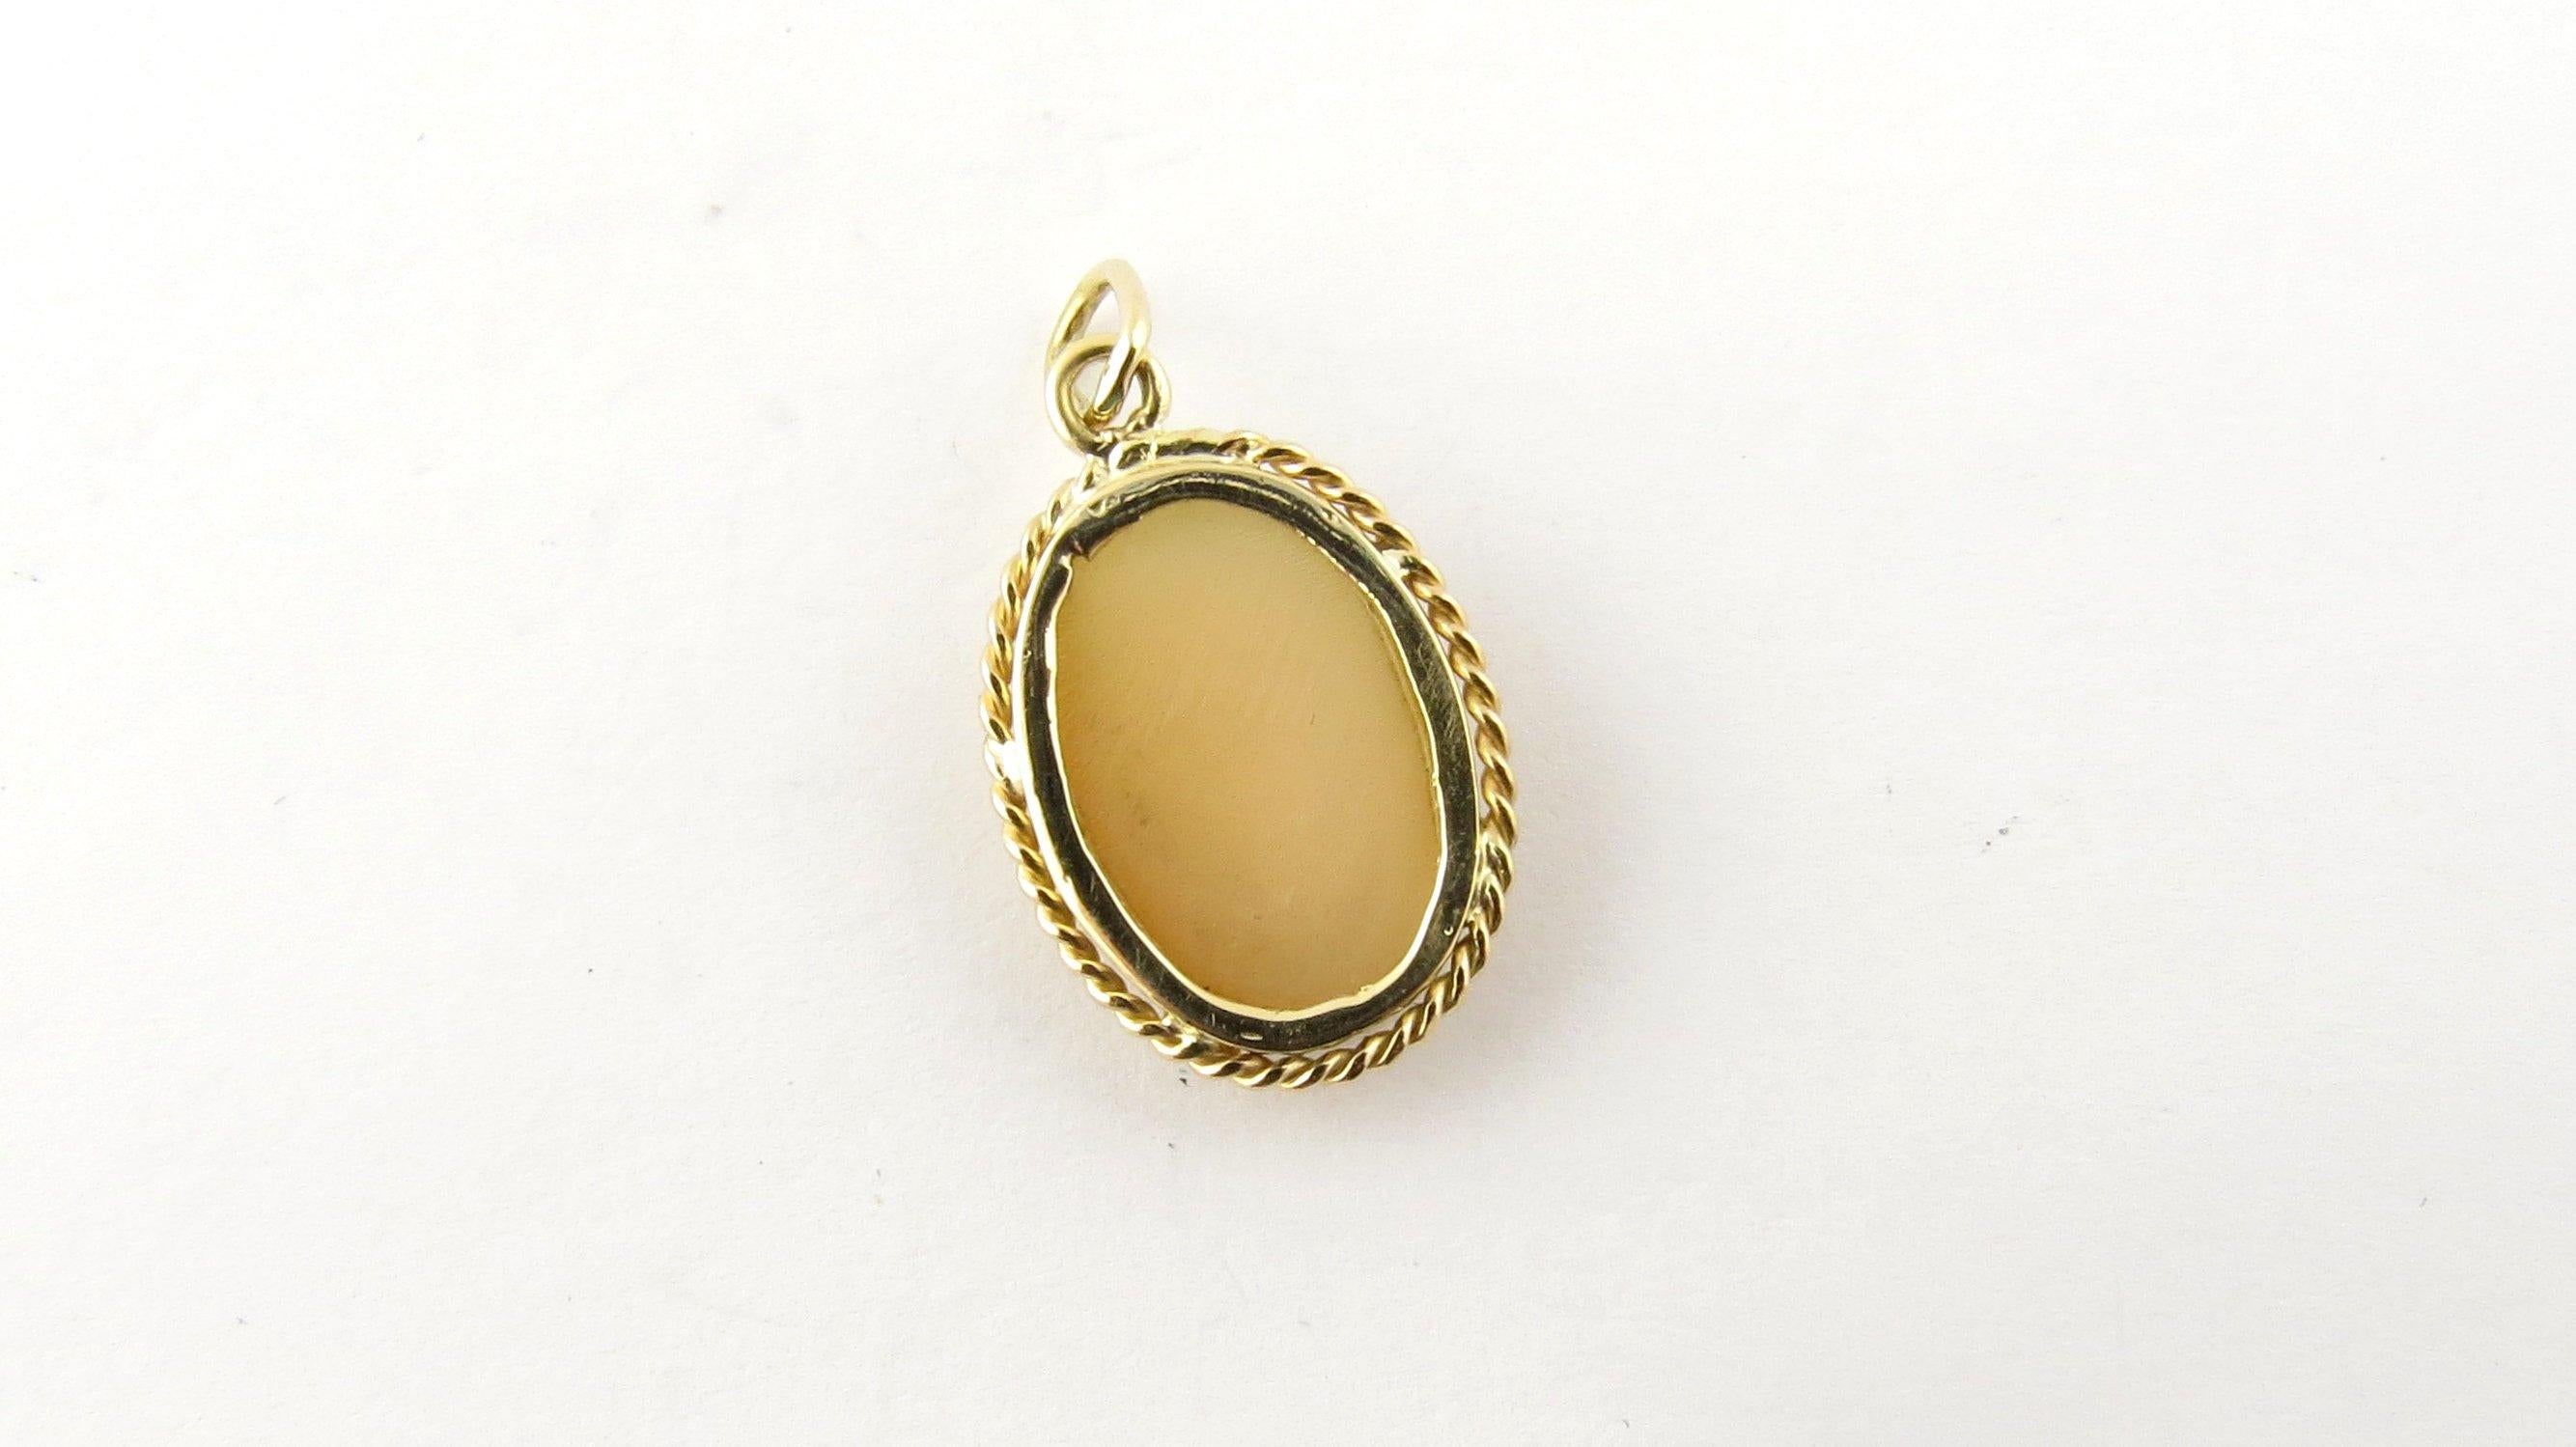 Vintage 14 Karat Yellow Gold Cameo Pendant. This elegant cameo pendant features a lovely lady in profile framed in classic 14K yellow gold.
Size: 19 mm x 12 mm (actual pendant). Weight: 0.9 dwt. / 1.5gr. Acid tested for 14K gold.
Very good